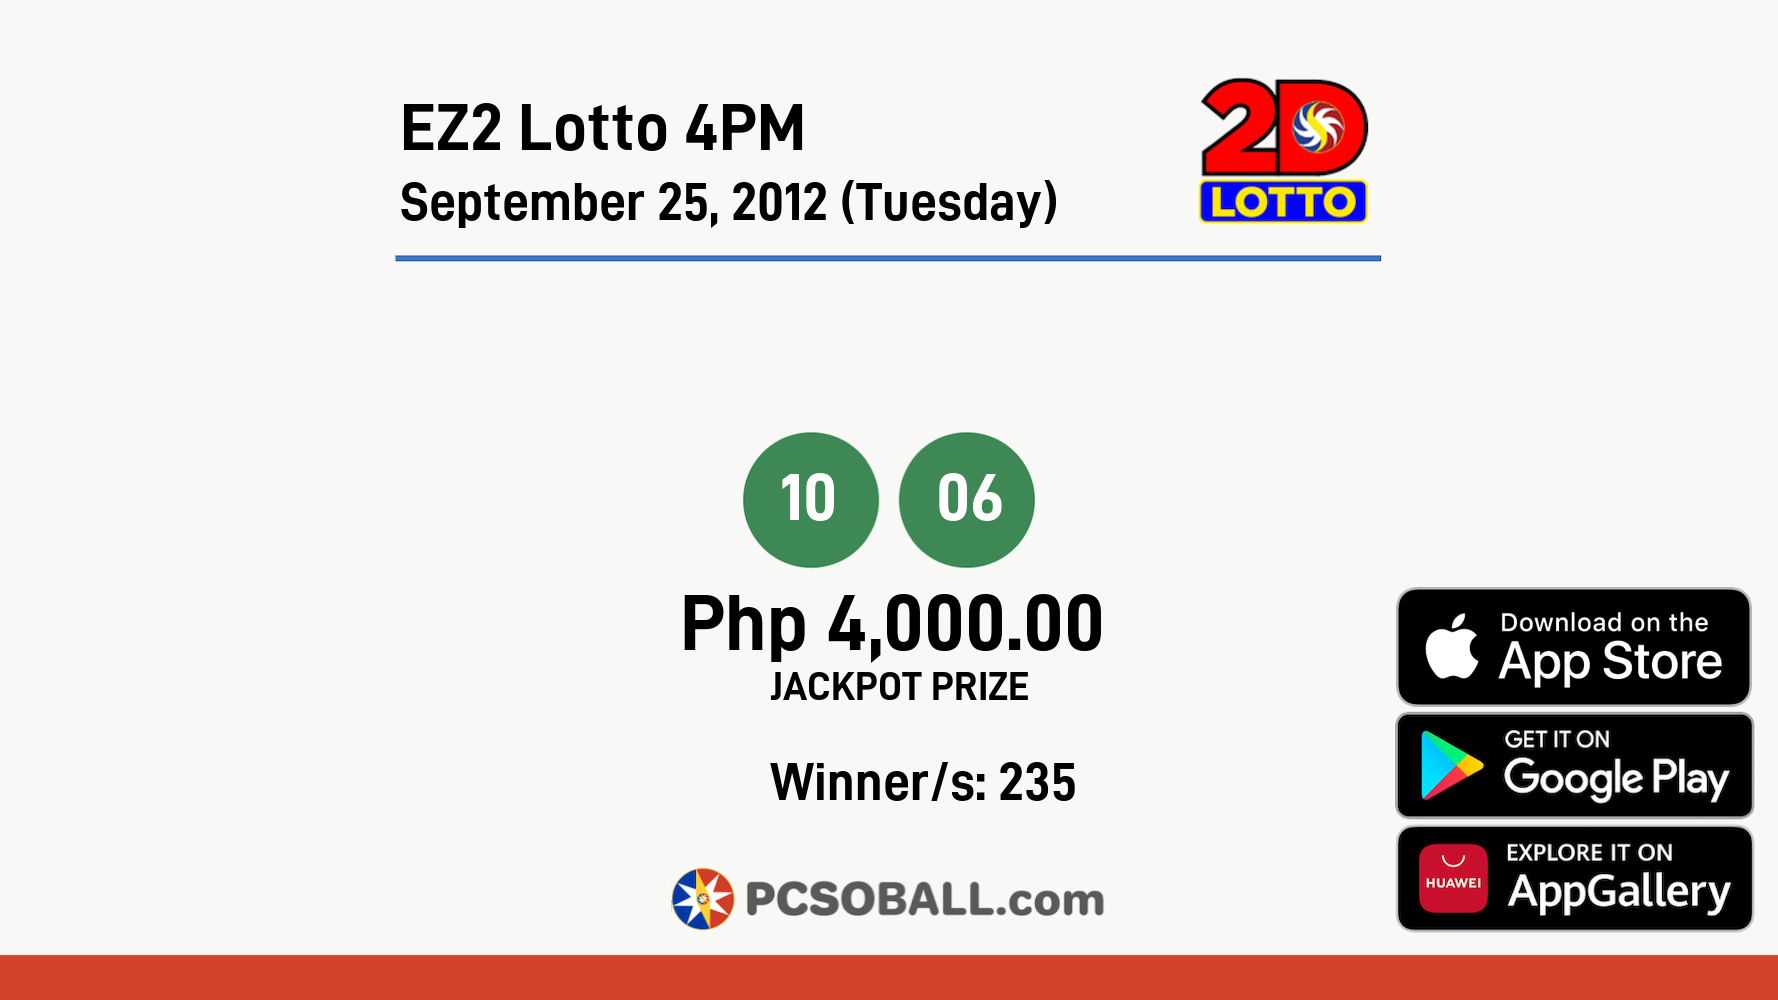 EZ2 Lotto 4PM September 25, 2012 (Tuesday) Result